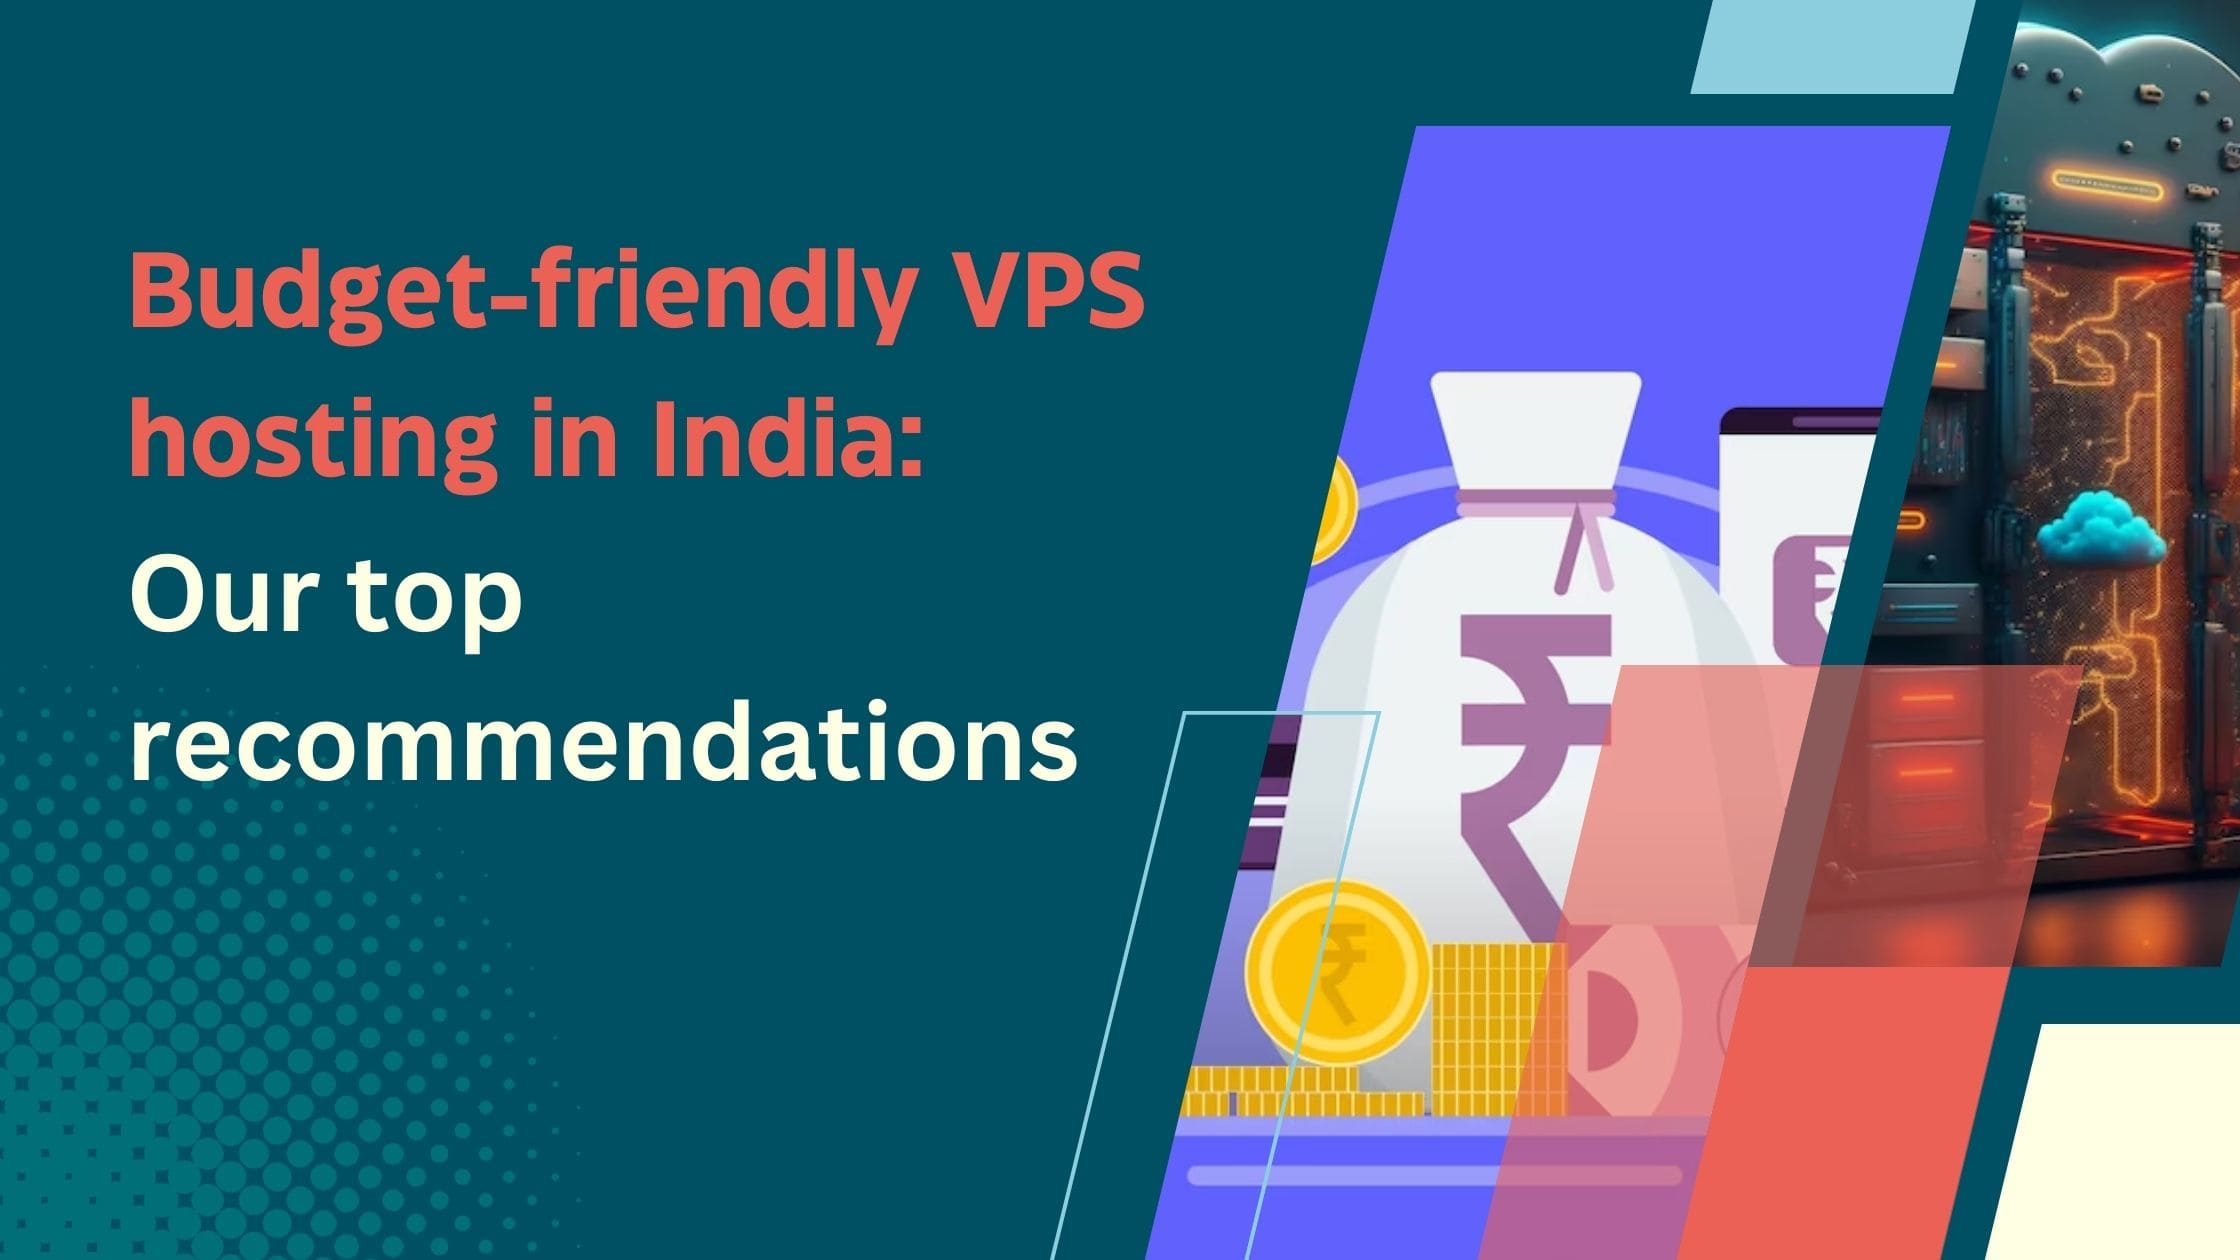 Budget-friendly VPS hosting in India Our top recommendations